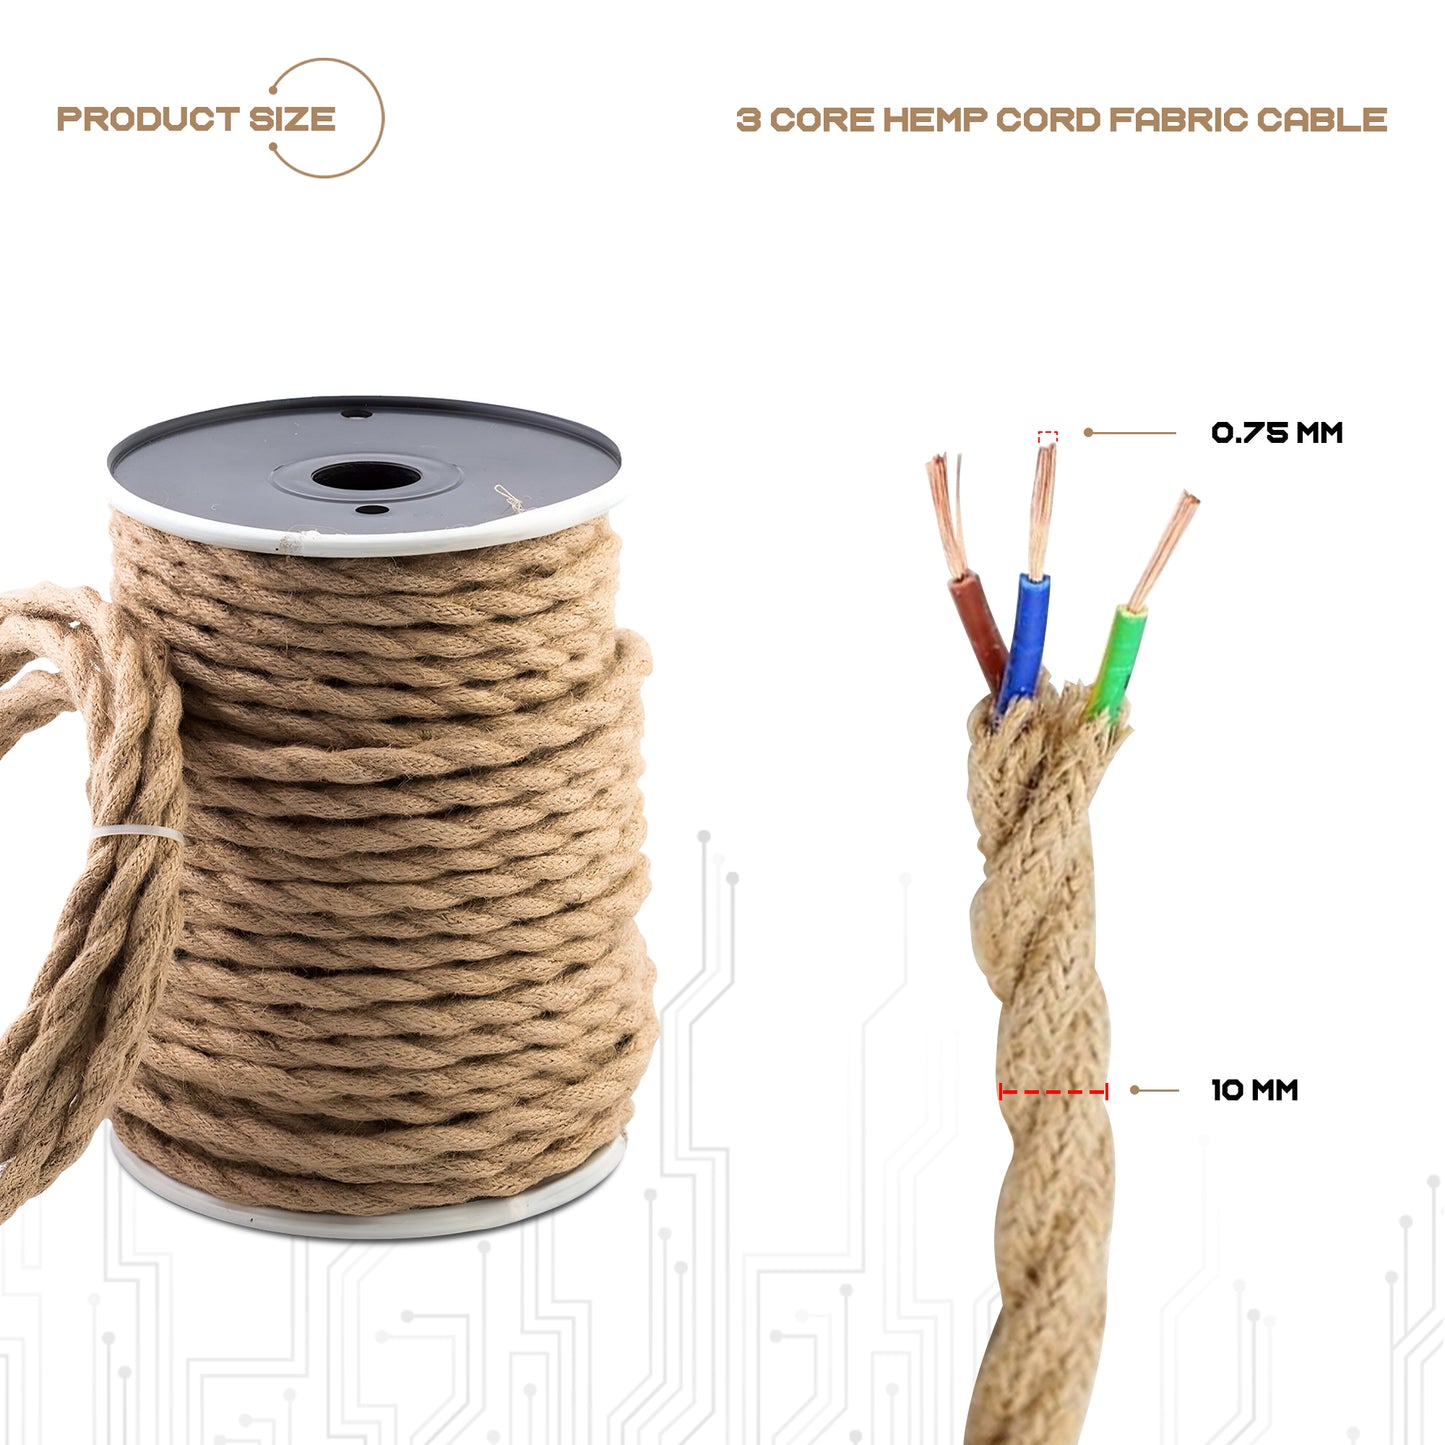 3core hemp rope fabric cable - size image